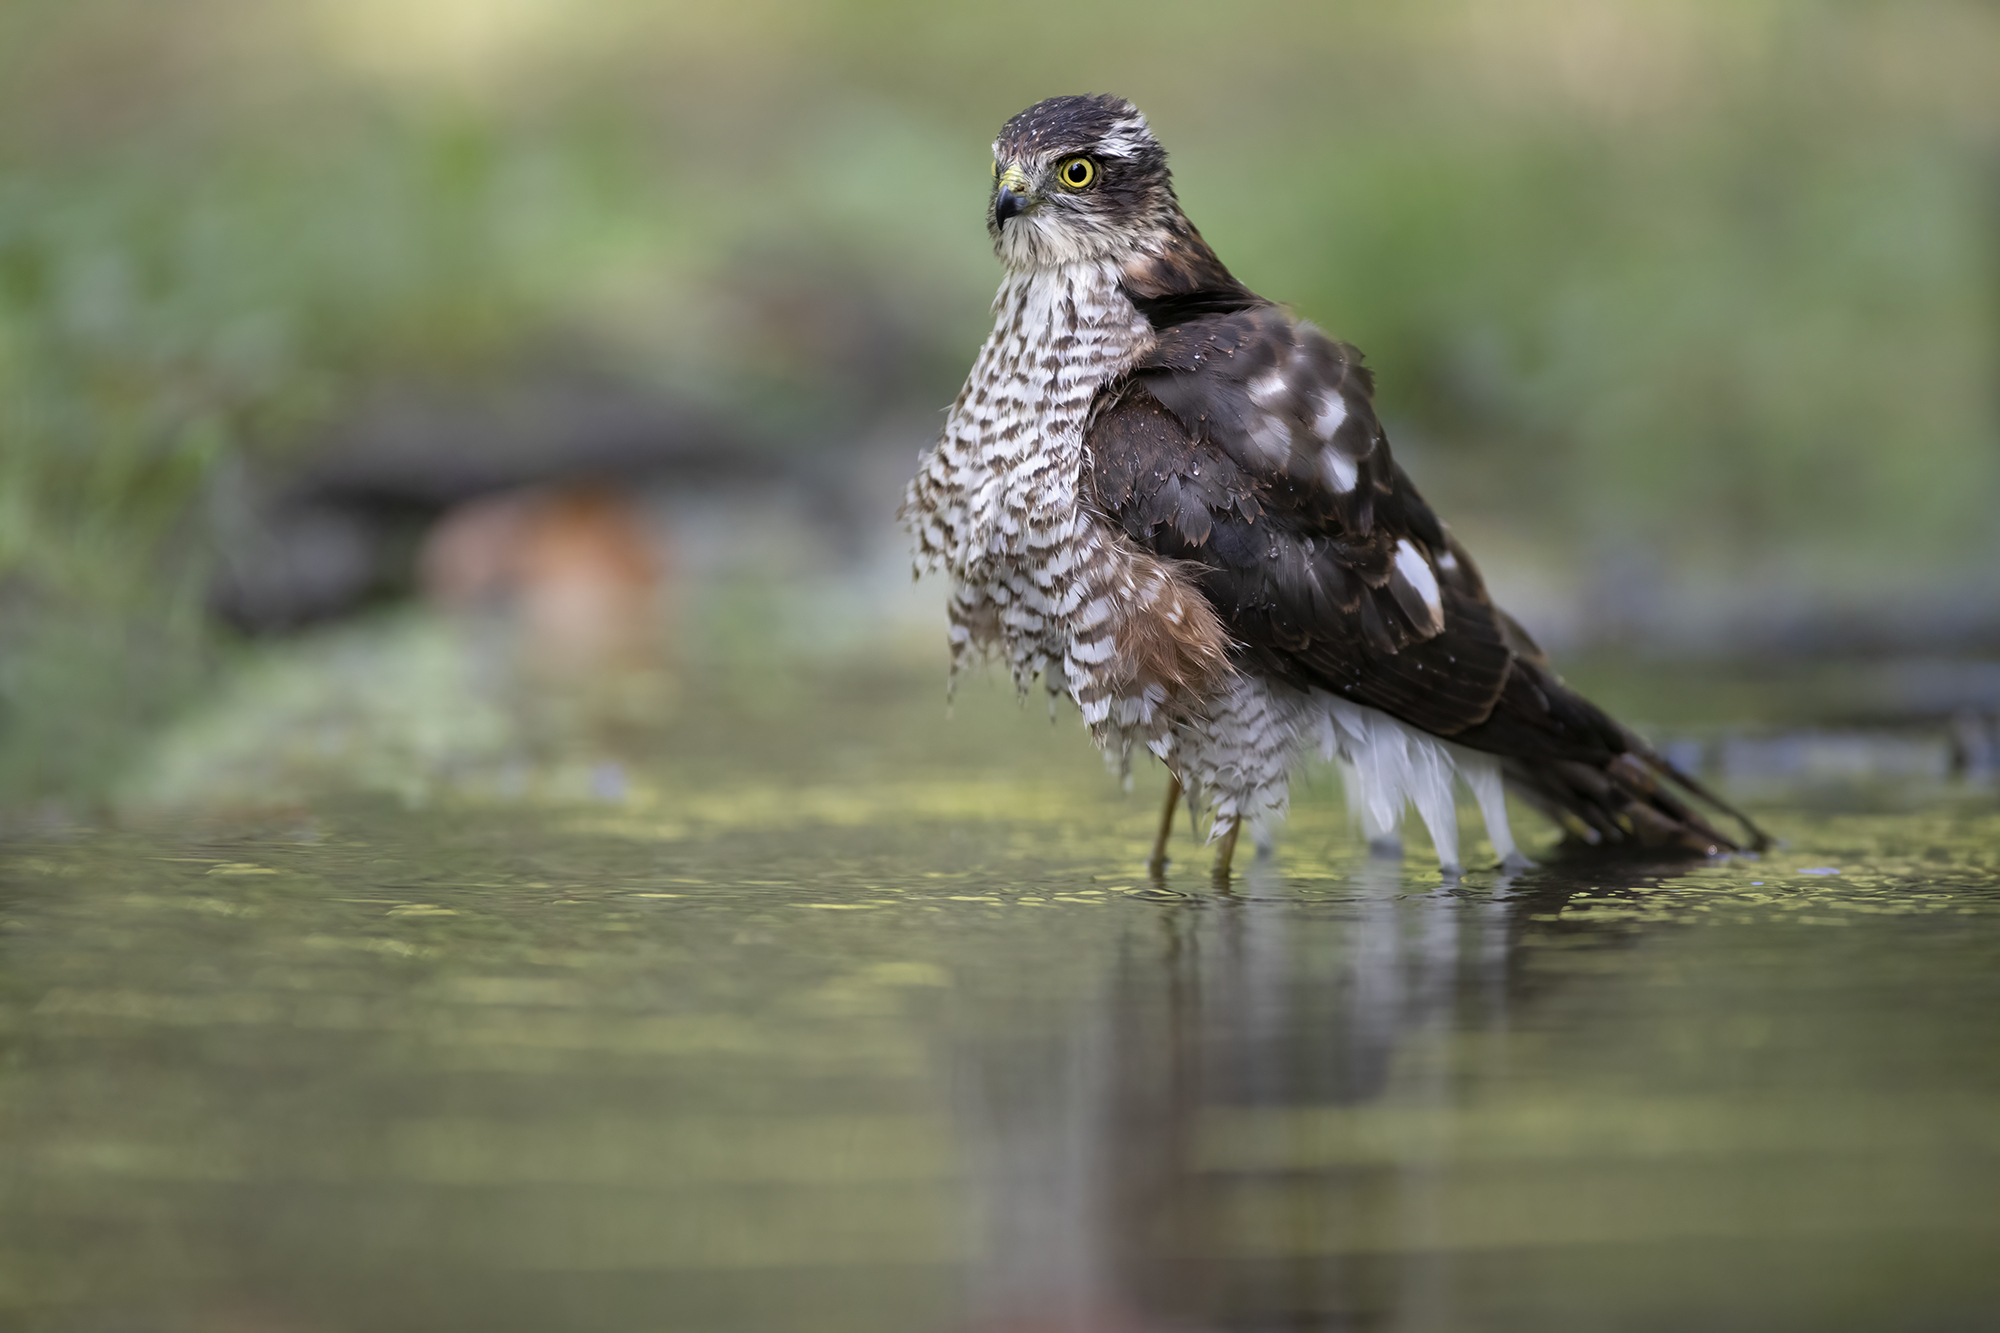 the sparrowhawk and water...